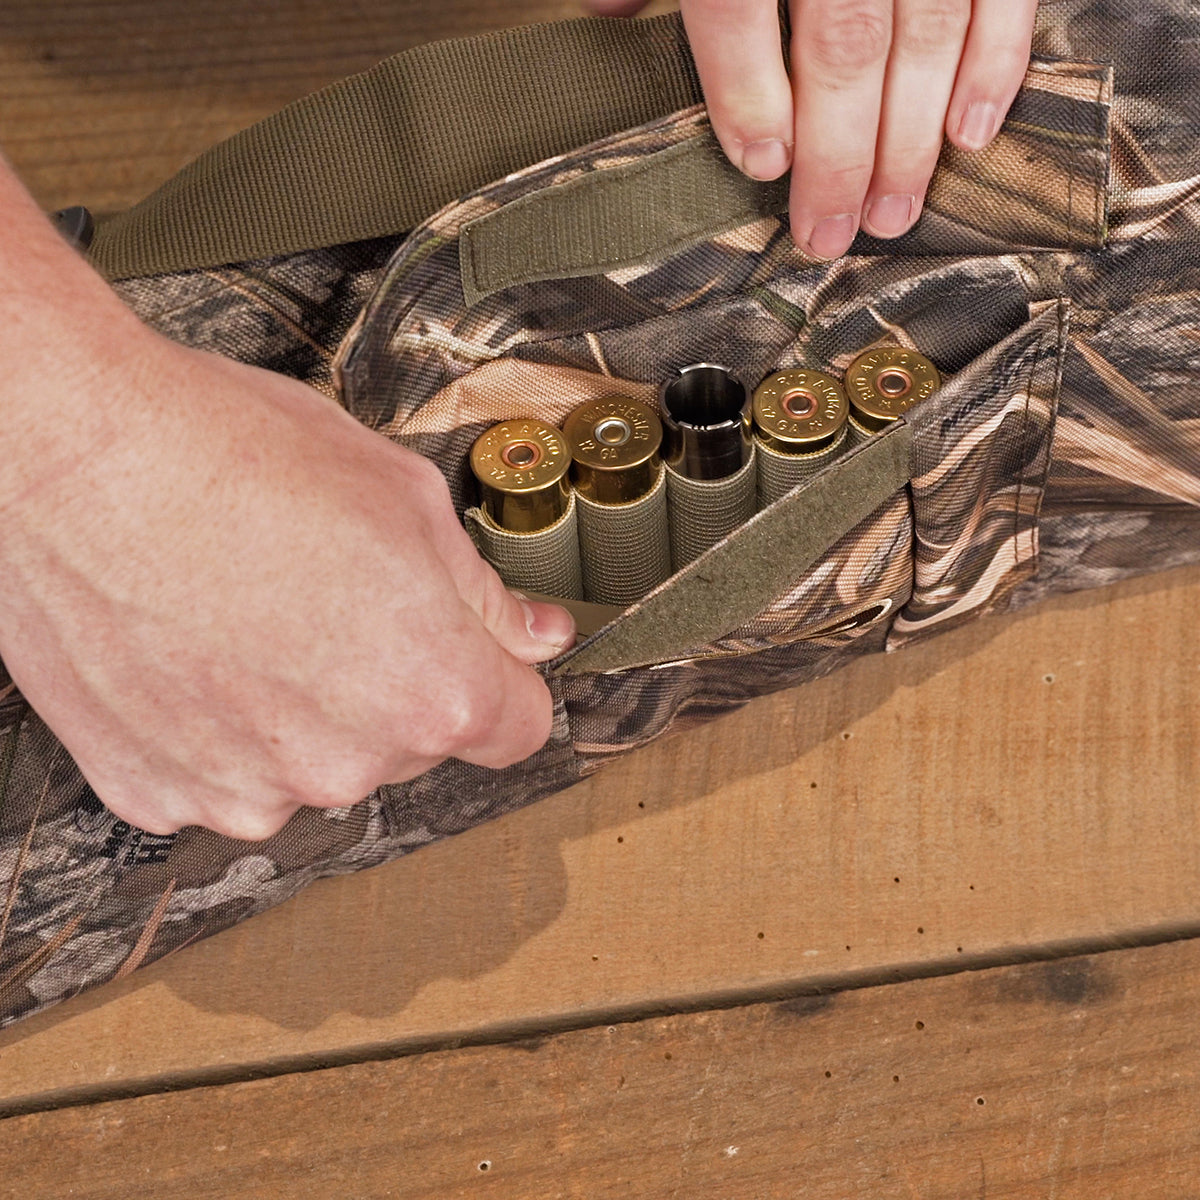 Side-Opening Padded Gun Case. Realtree Max-7